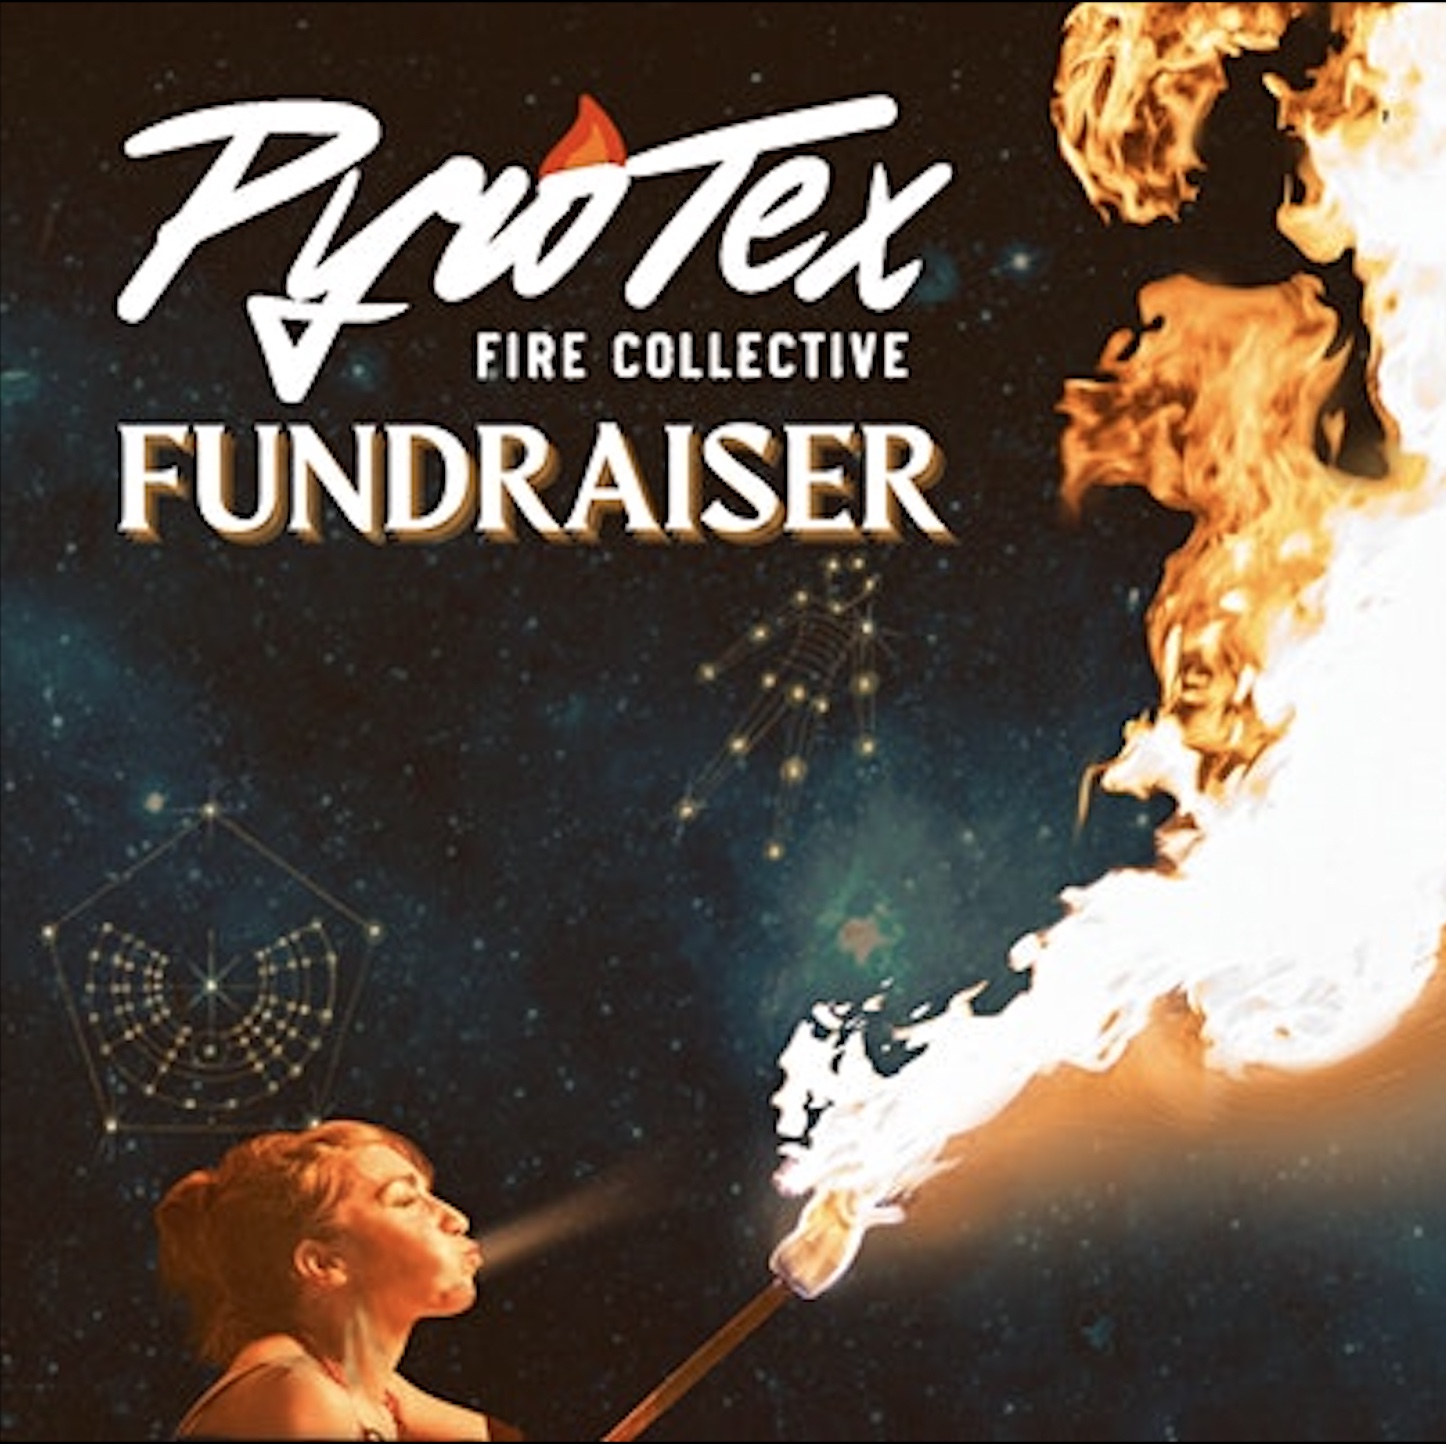 PyroTex Fire Collective Fundraiser (Patio)